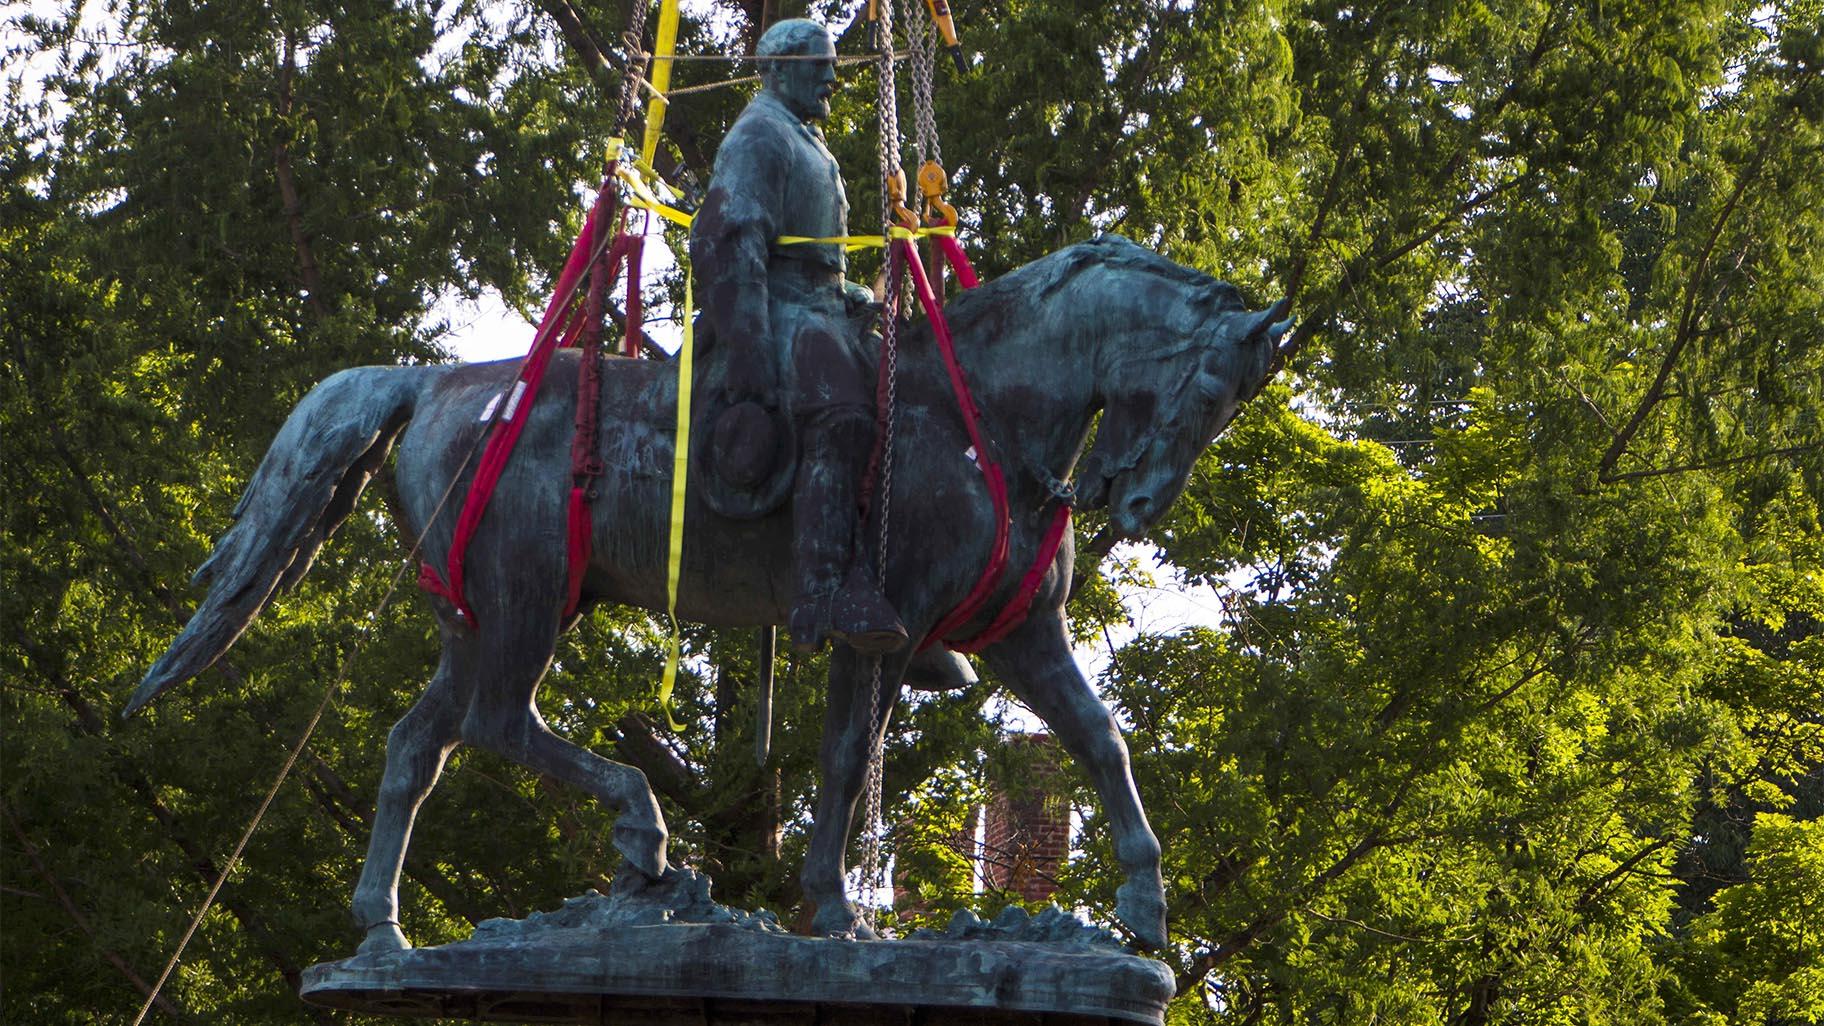 Workers remove the monument of Confederate General Robert E. Lee on Saturday, July 10, 2021 in Charlottesville, Va. The removal of the Lee statue follows years of contention, community anguish and legal fights. (AP Photo / John C. Clark)